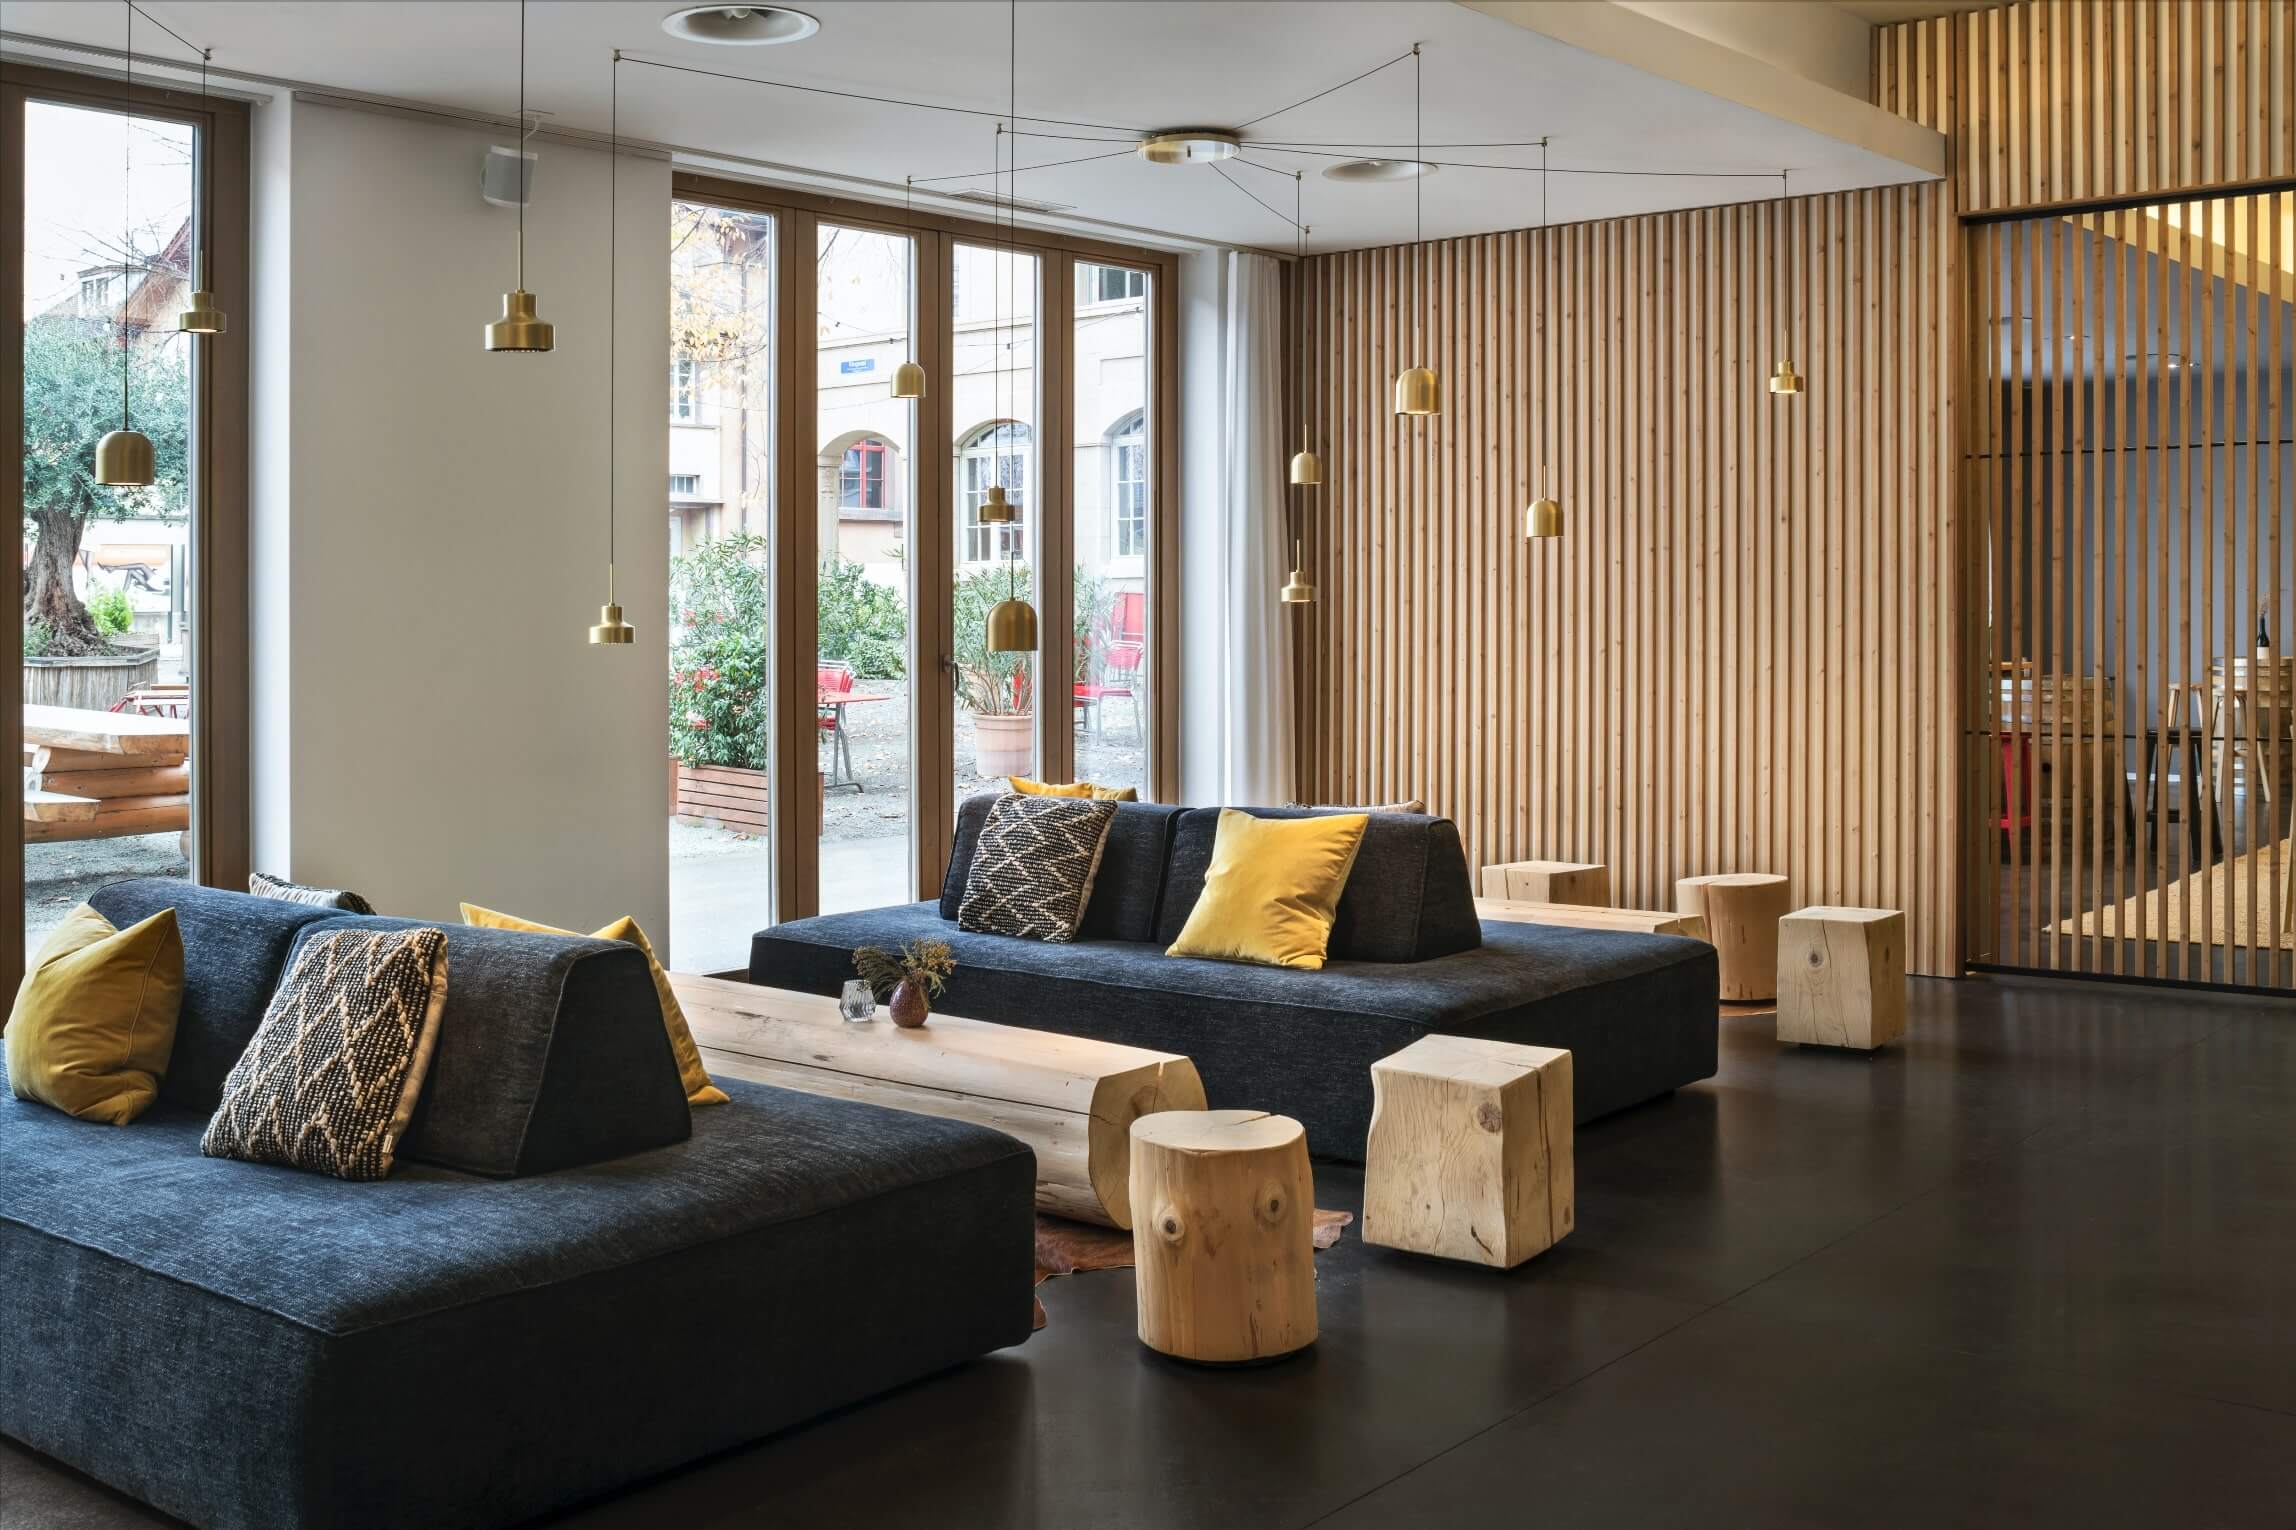 the lobby of the hotel has a nordic design which integrates wood